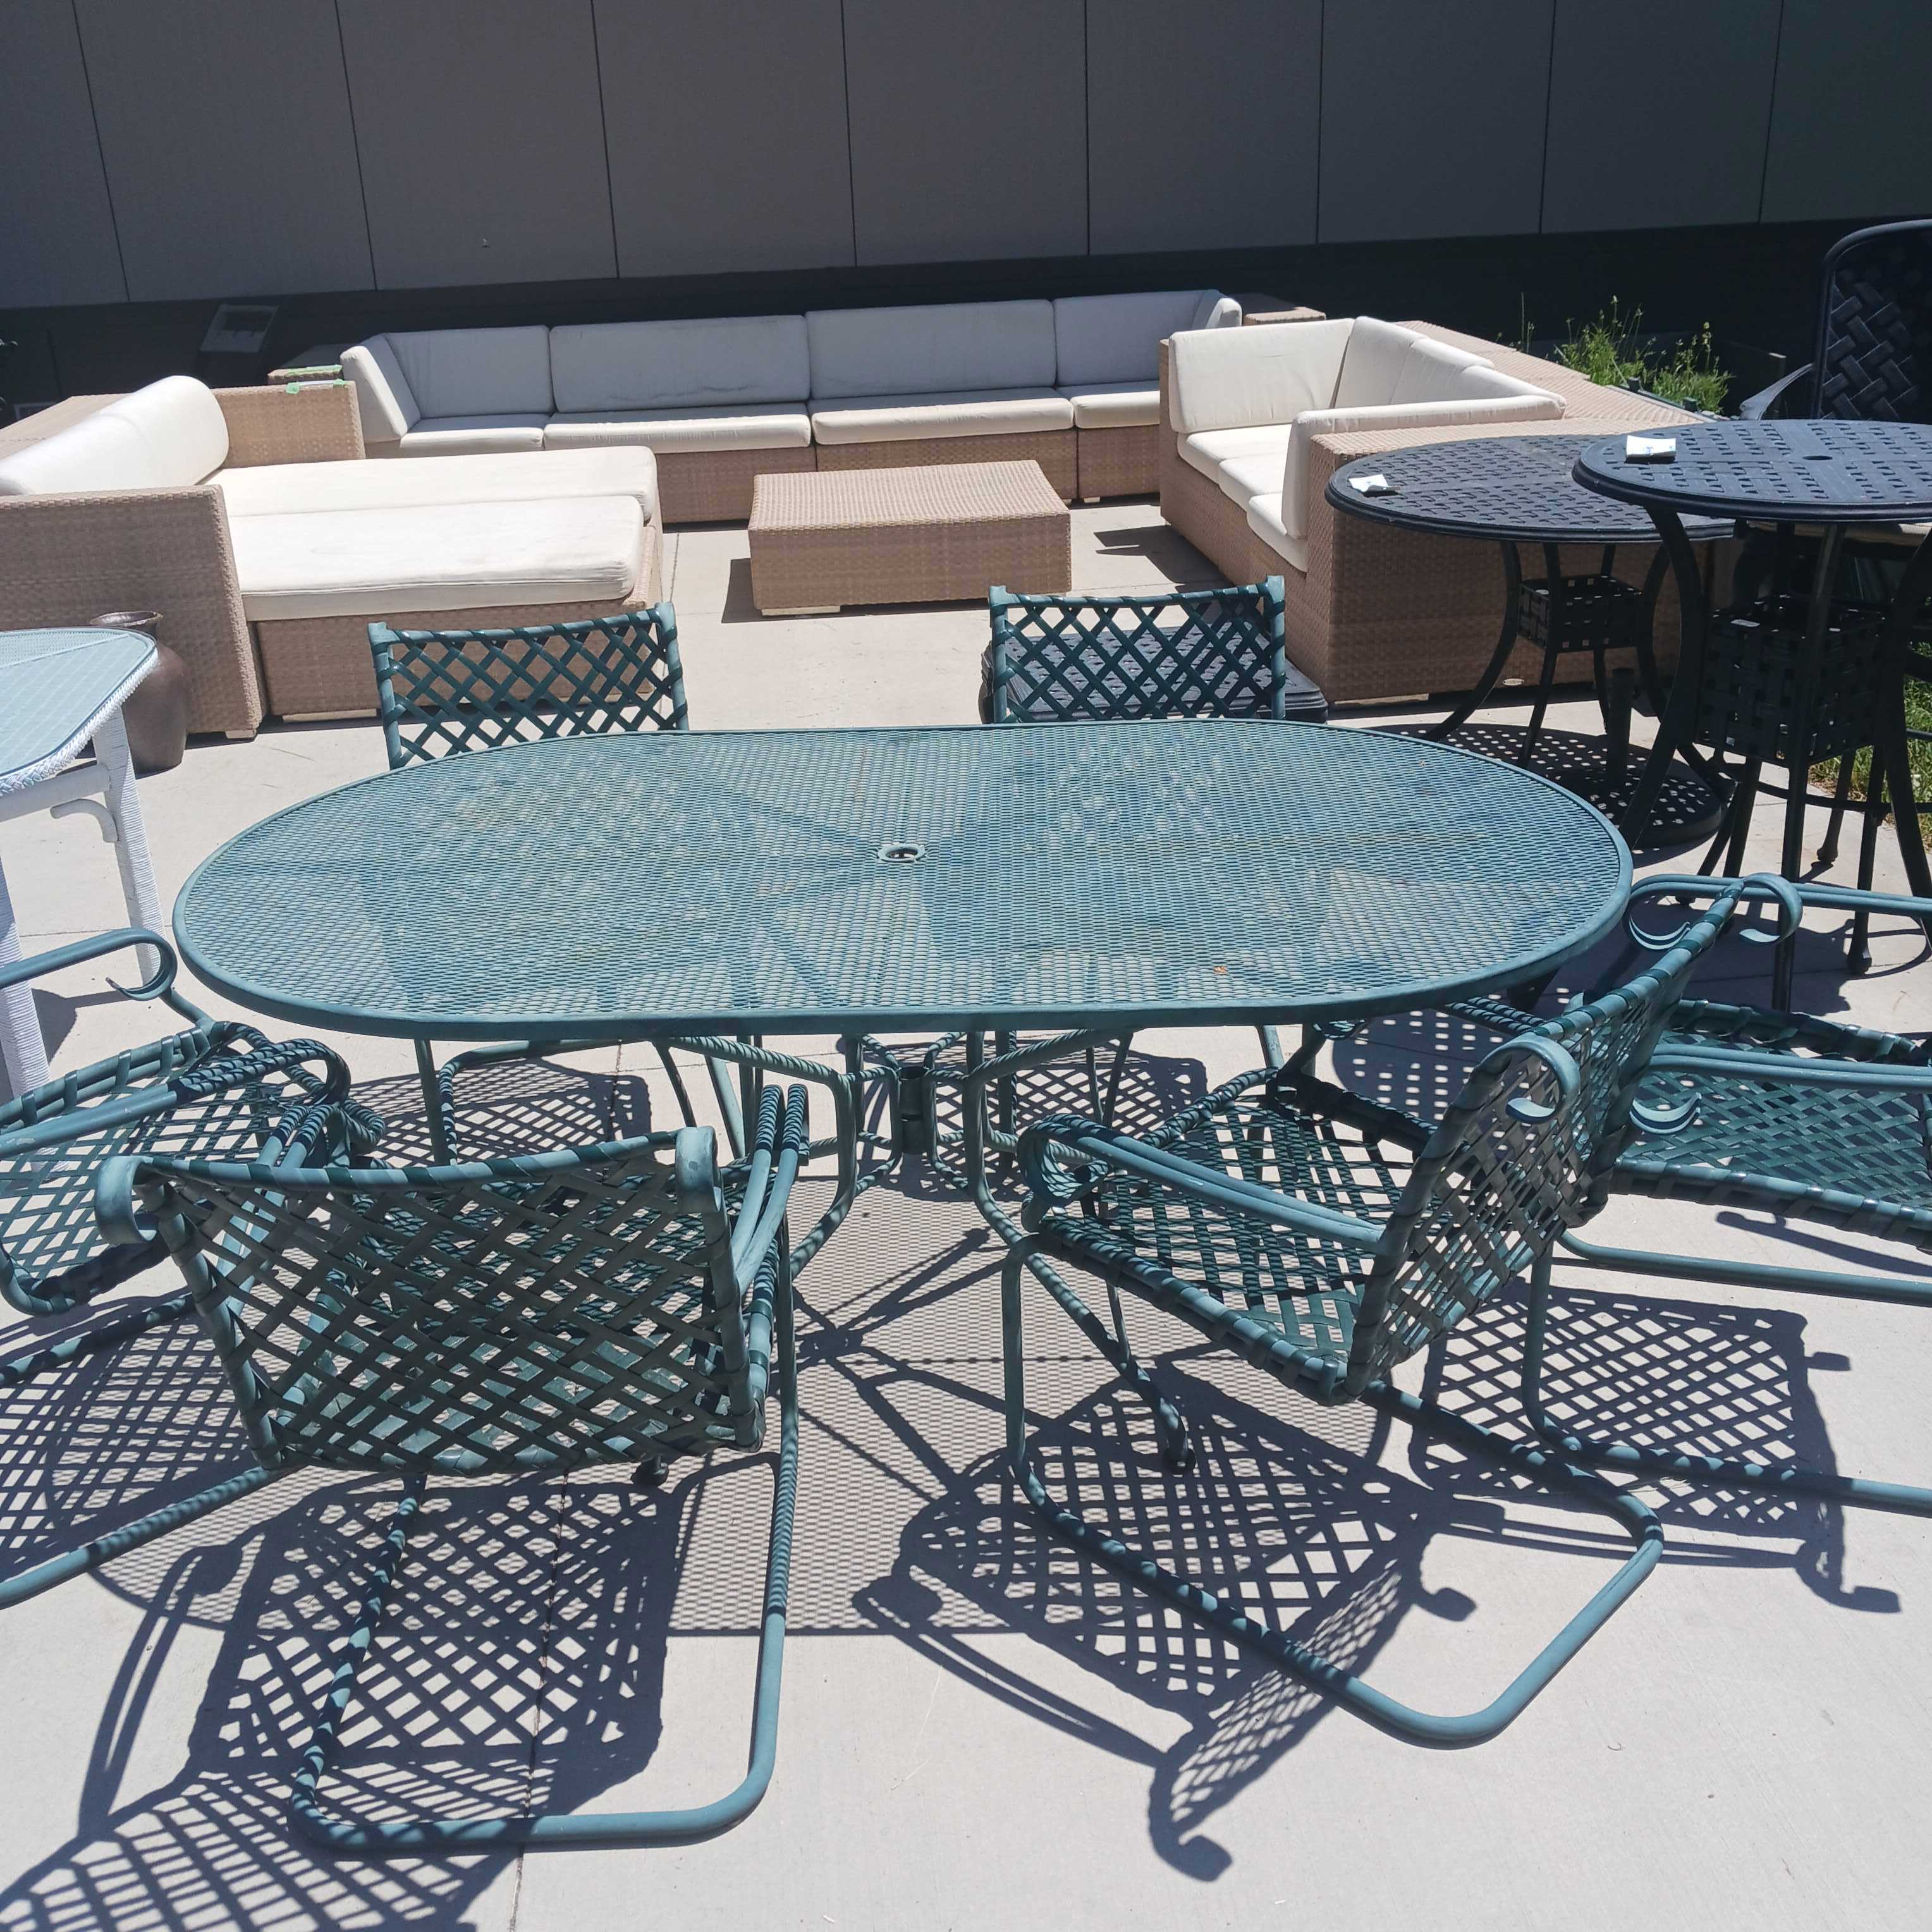 SET OF 7 Green Lattice Patio Table with Plastic Strap Chairs